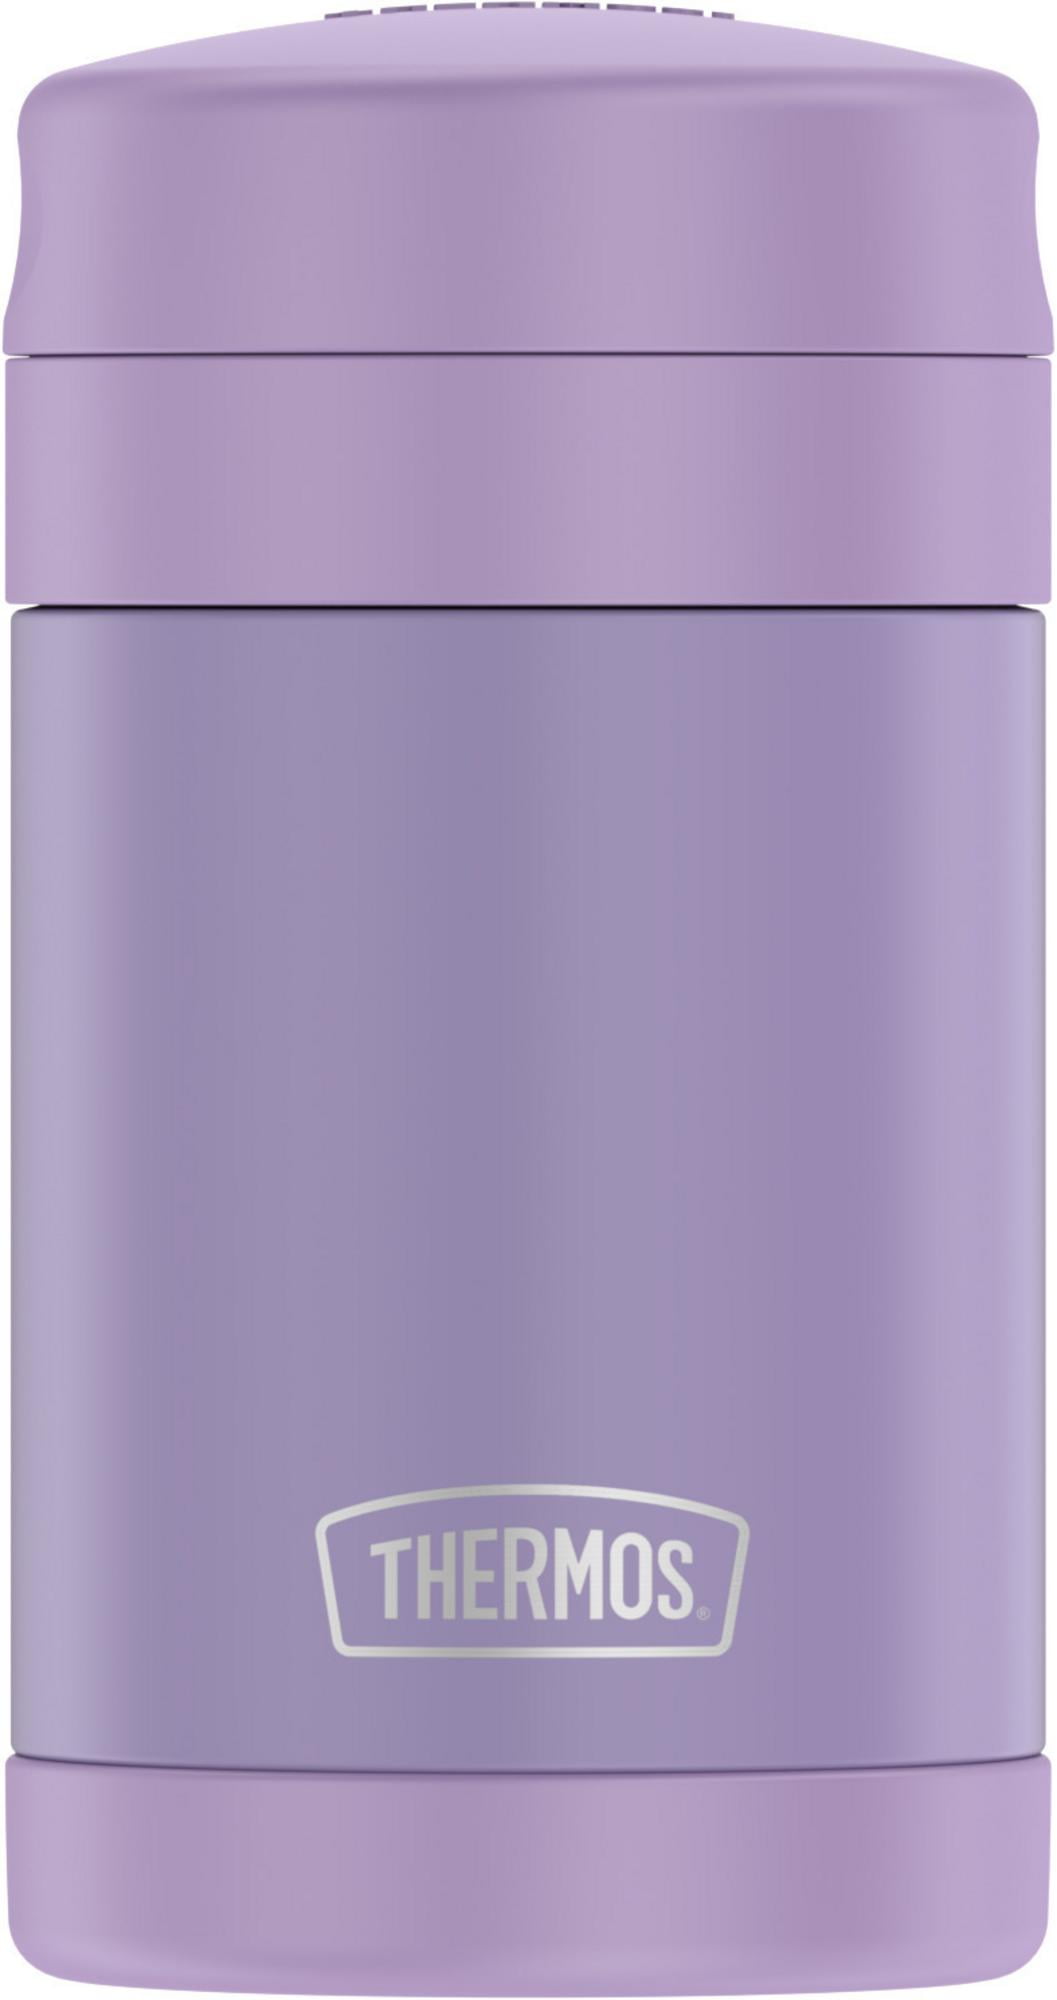 Thermos 30379550 16 oz Funtainer Bottle, Lavender, 1 - Food 4 Less